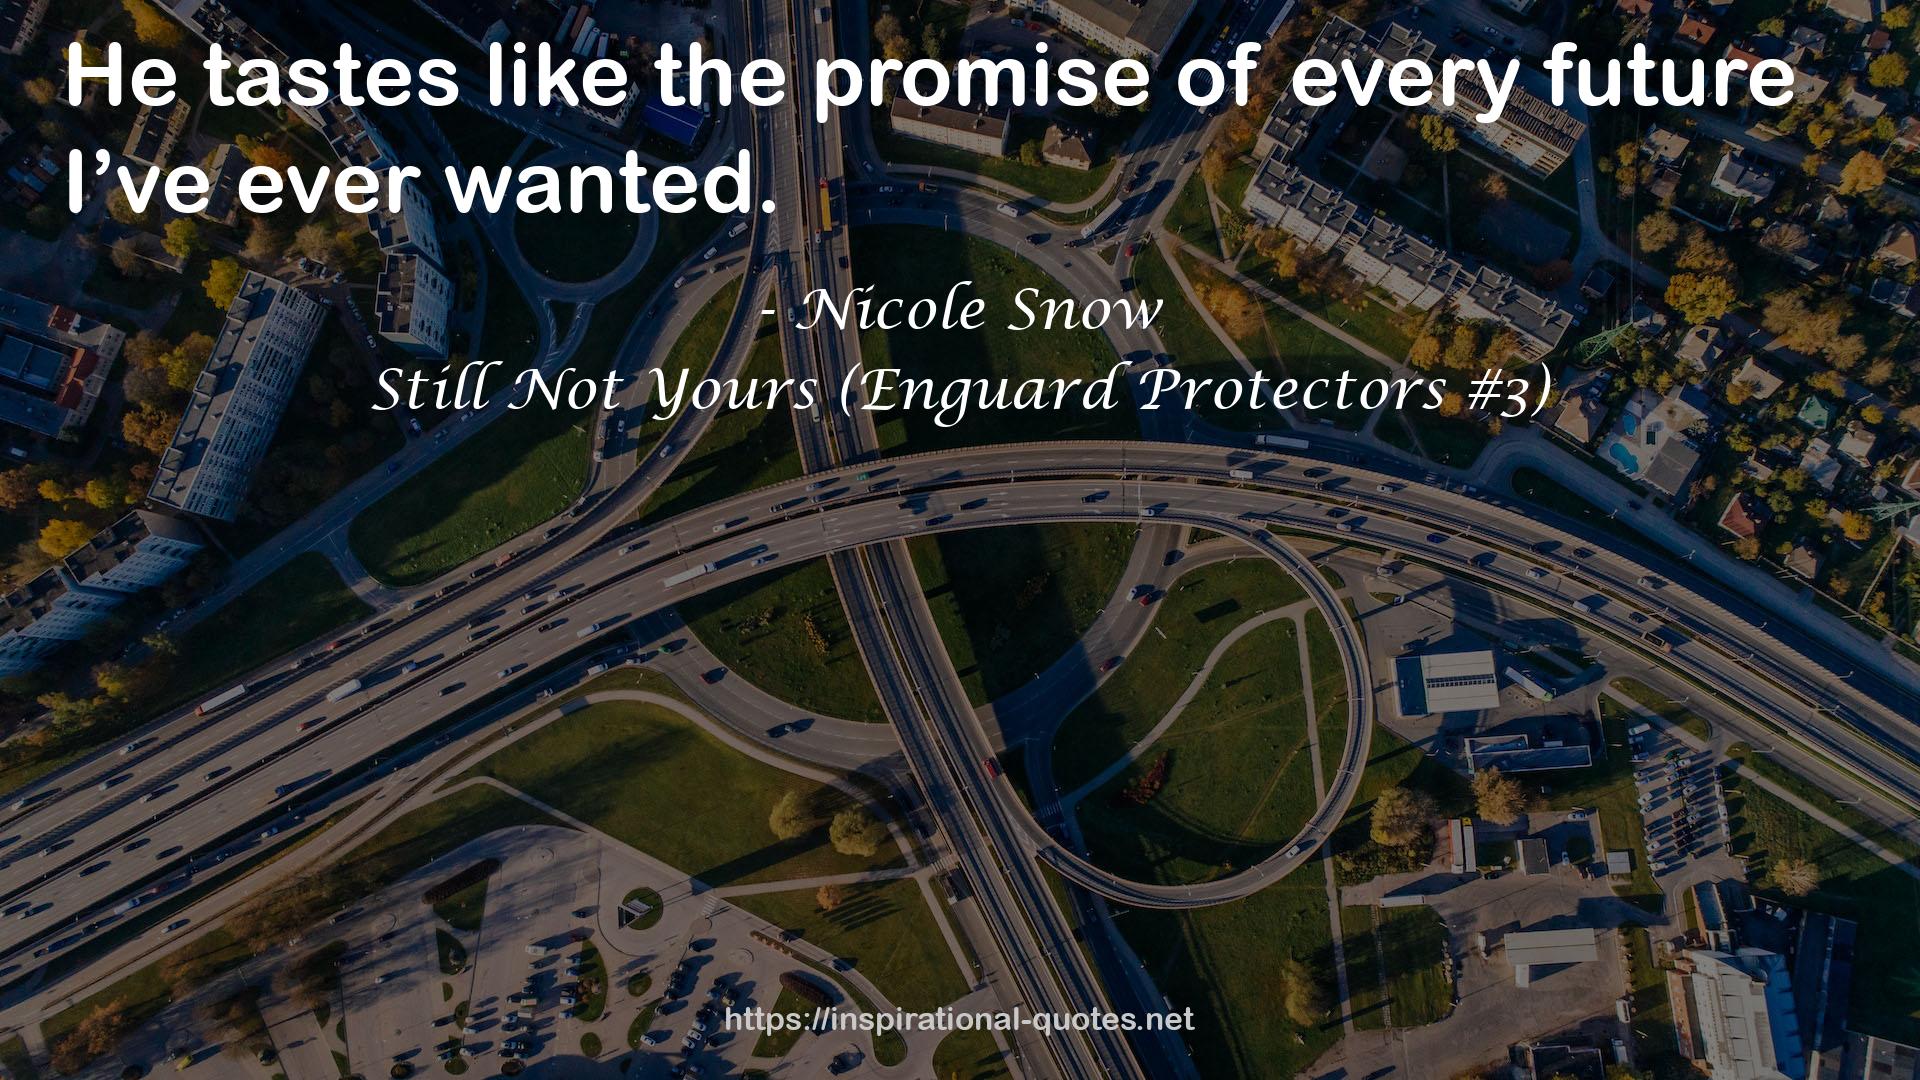 Still Not Yours (Enguard Protectors #3) QUOTES